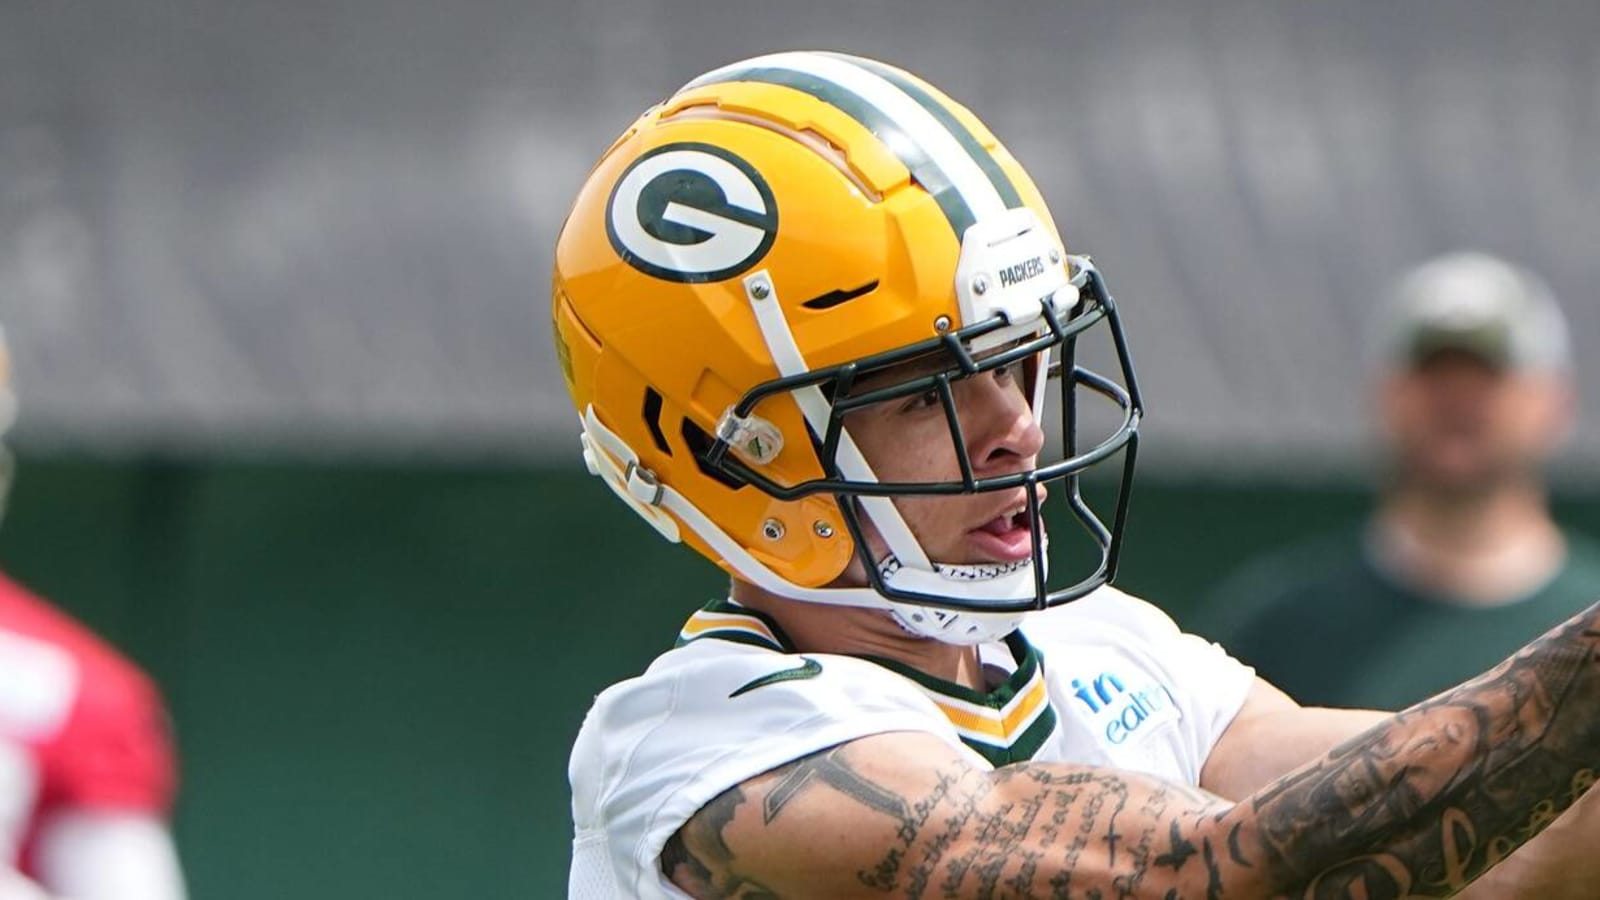 Packers rookie WR Christian Watson participates in team drills on Sunday